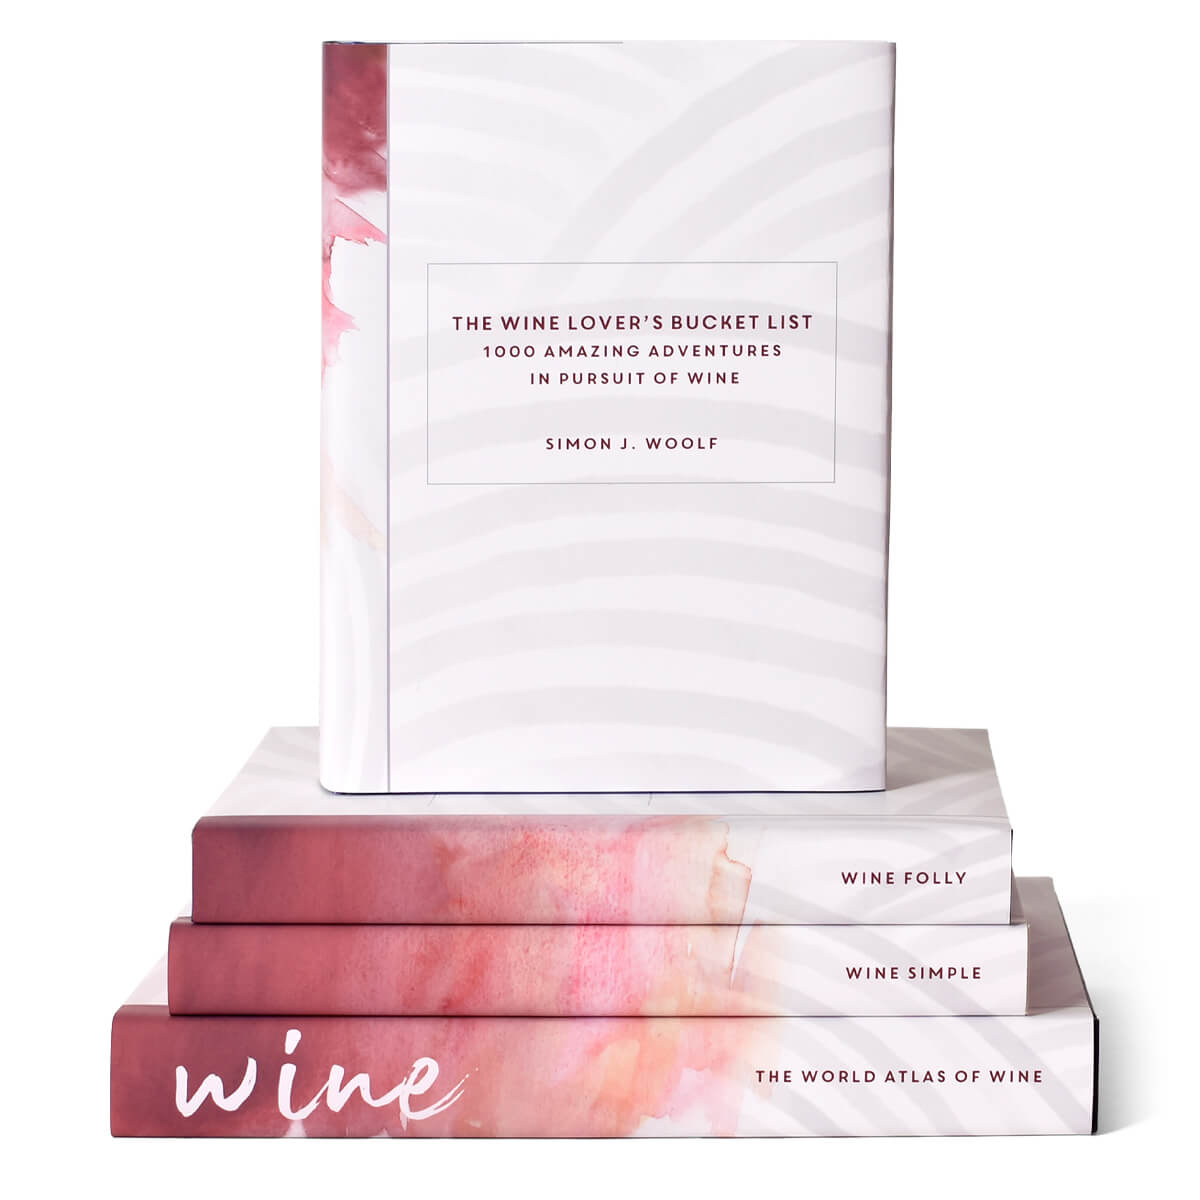 Wine Books in a custom book set for your collection.  Beautiful coffee table books curated for you and covered in our custom book jackets. JuniperCustom high quality Juniper Books dust jackets protect and enhance your books!